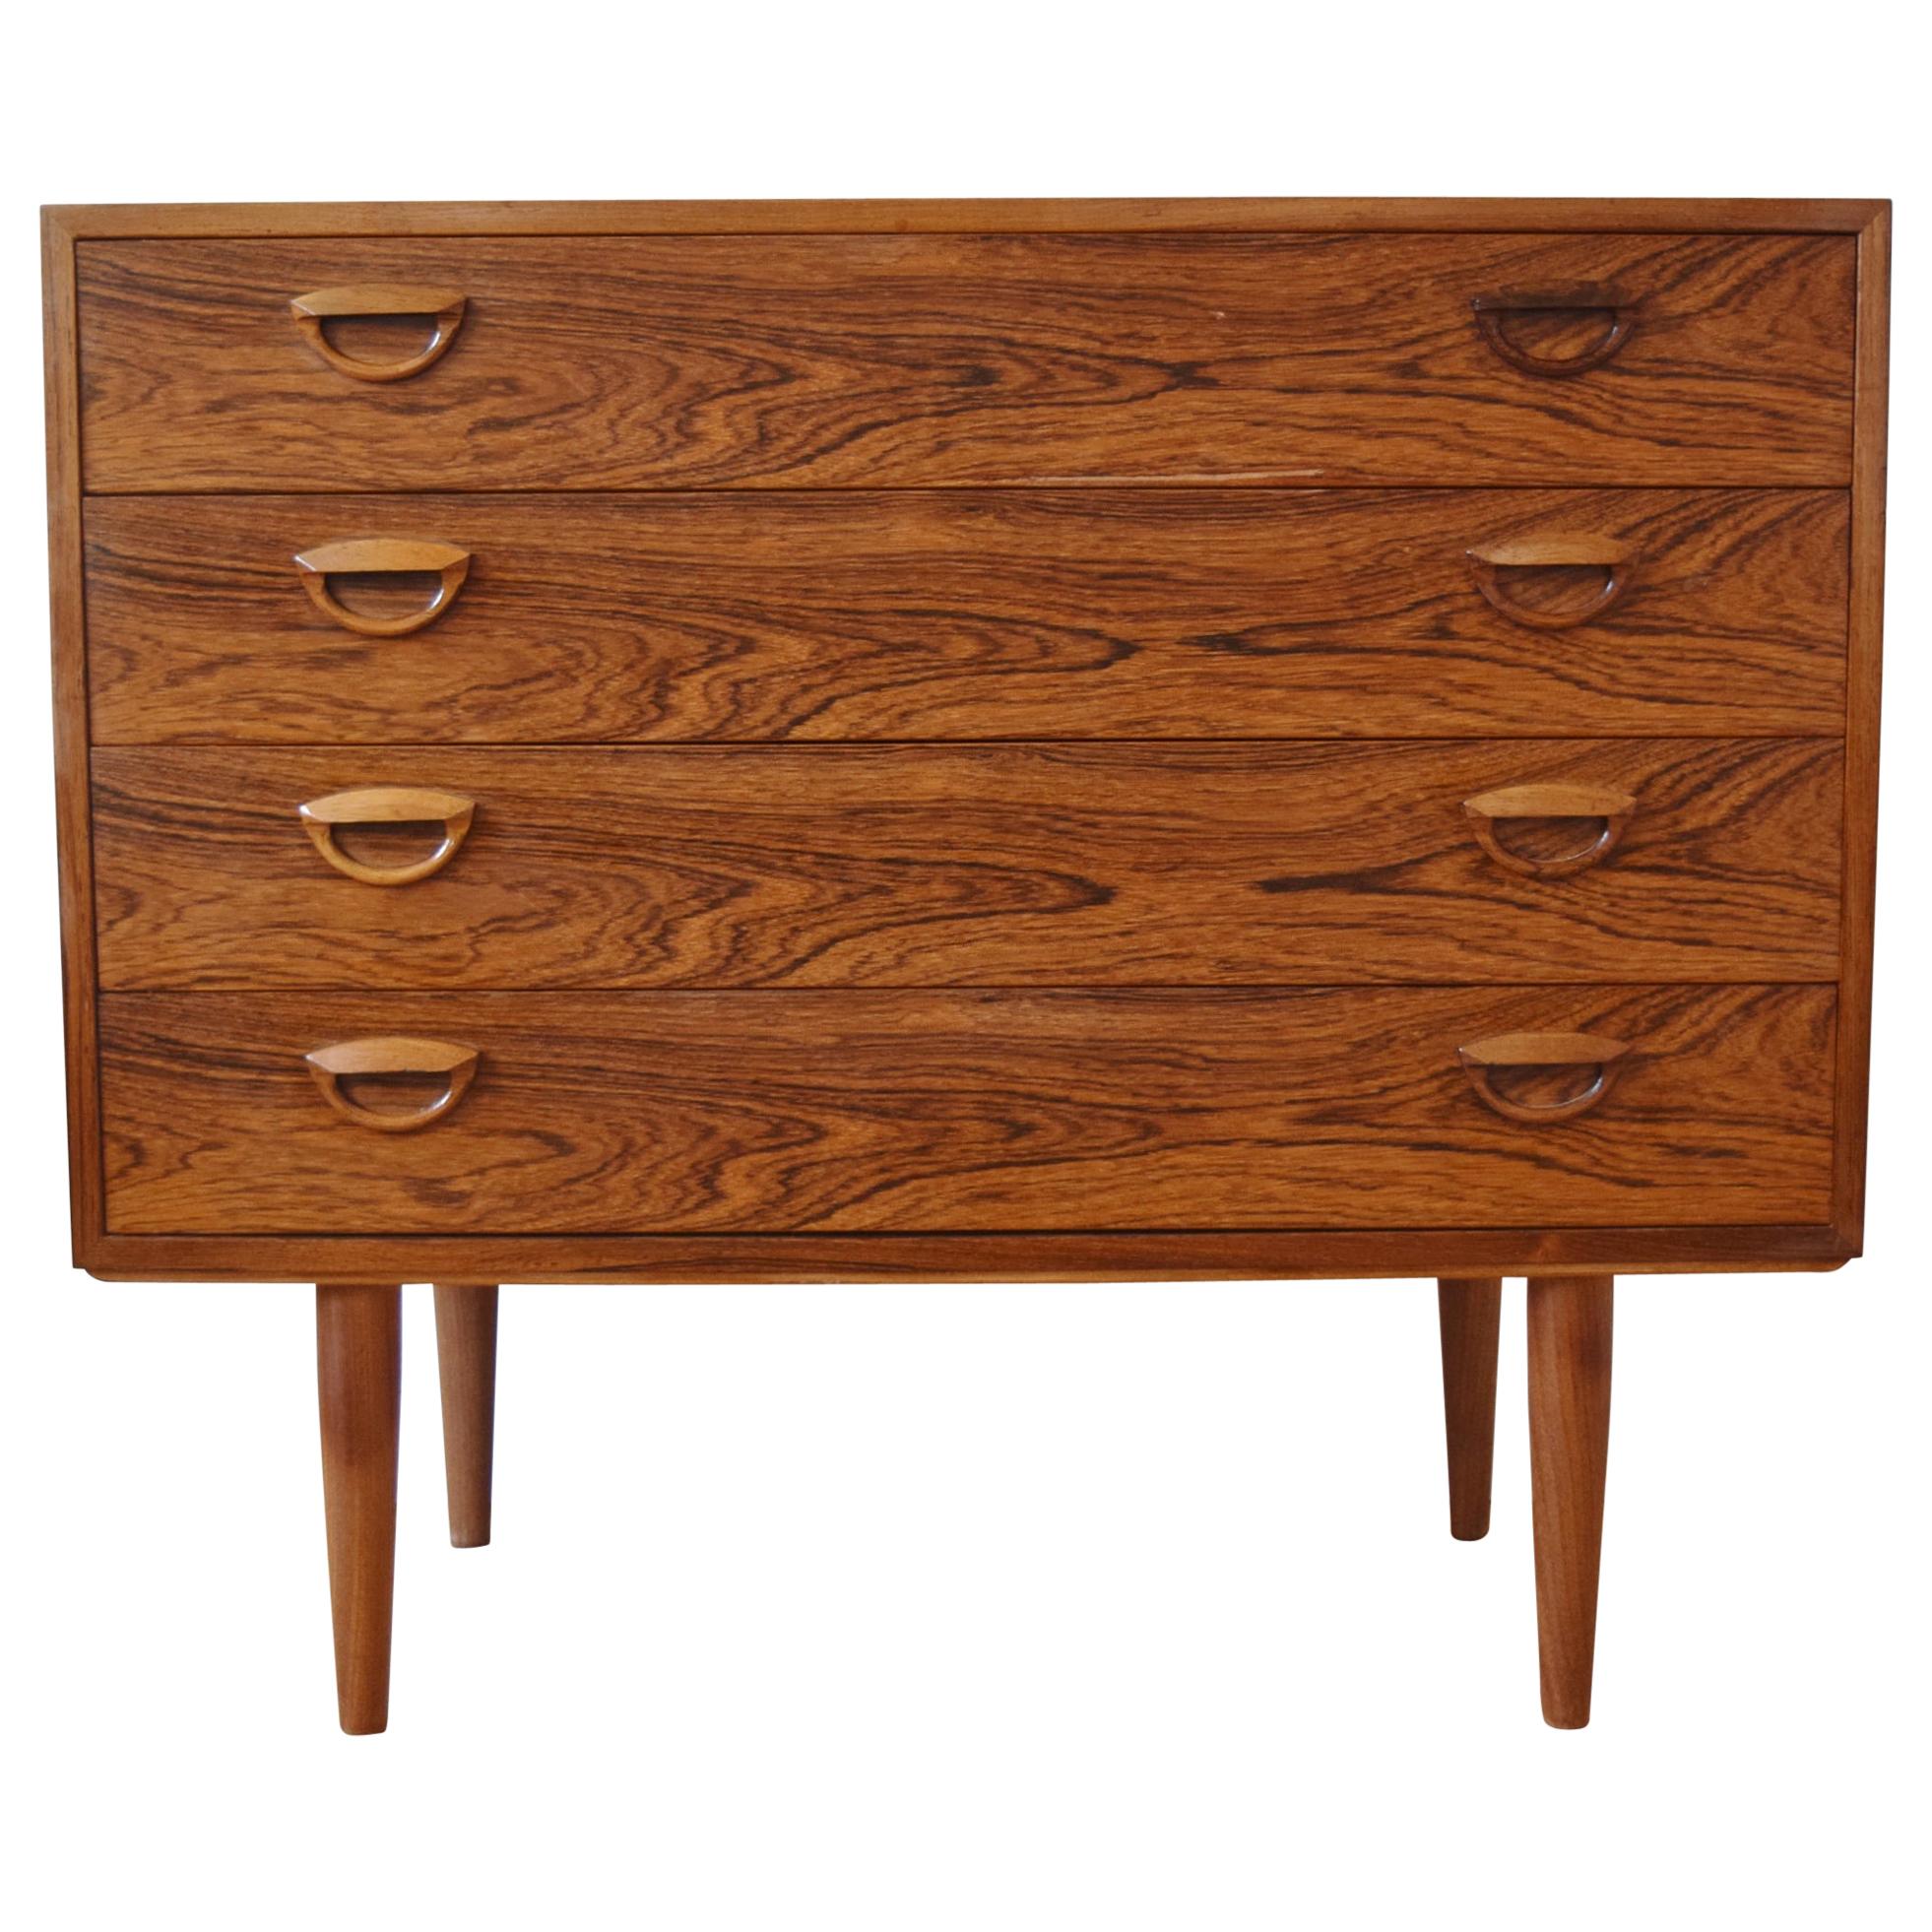 Kai Kristiansen Rosewood Chest of Drawers, 1960s For Sale